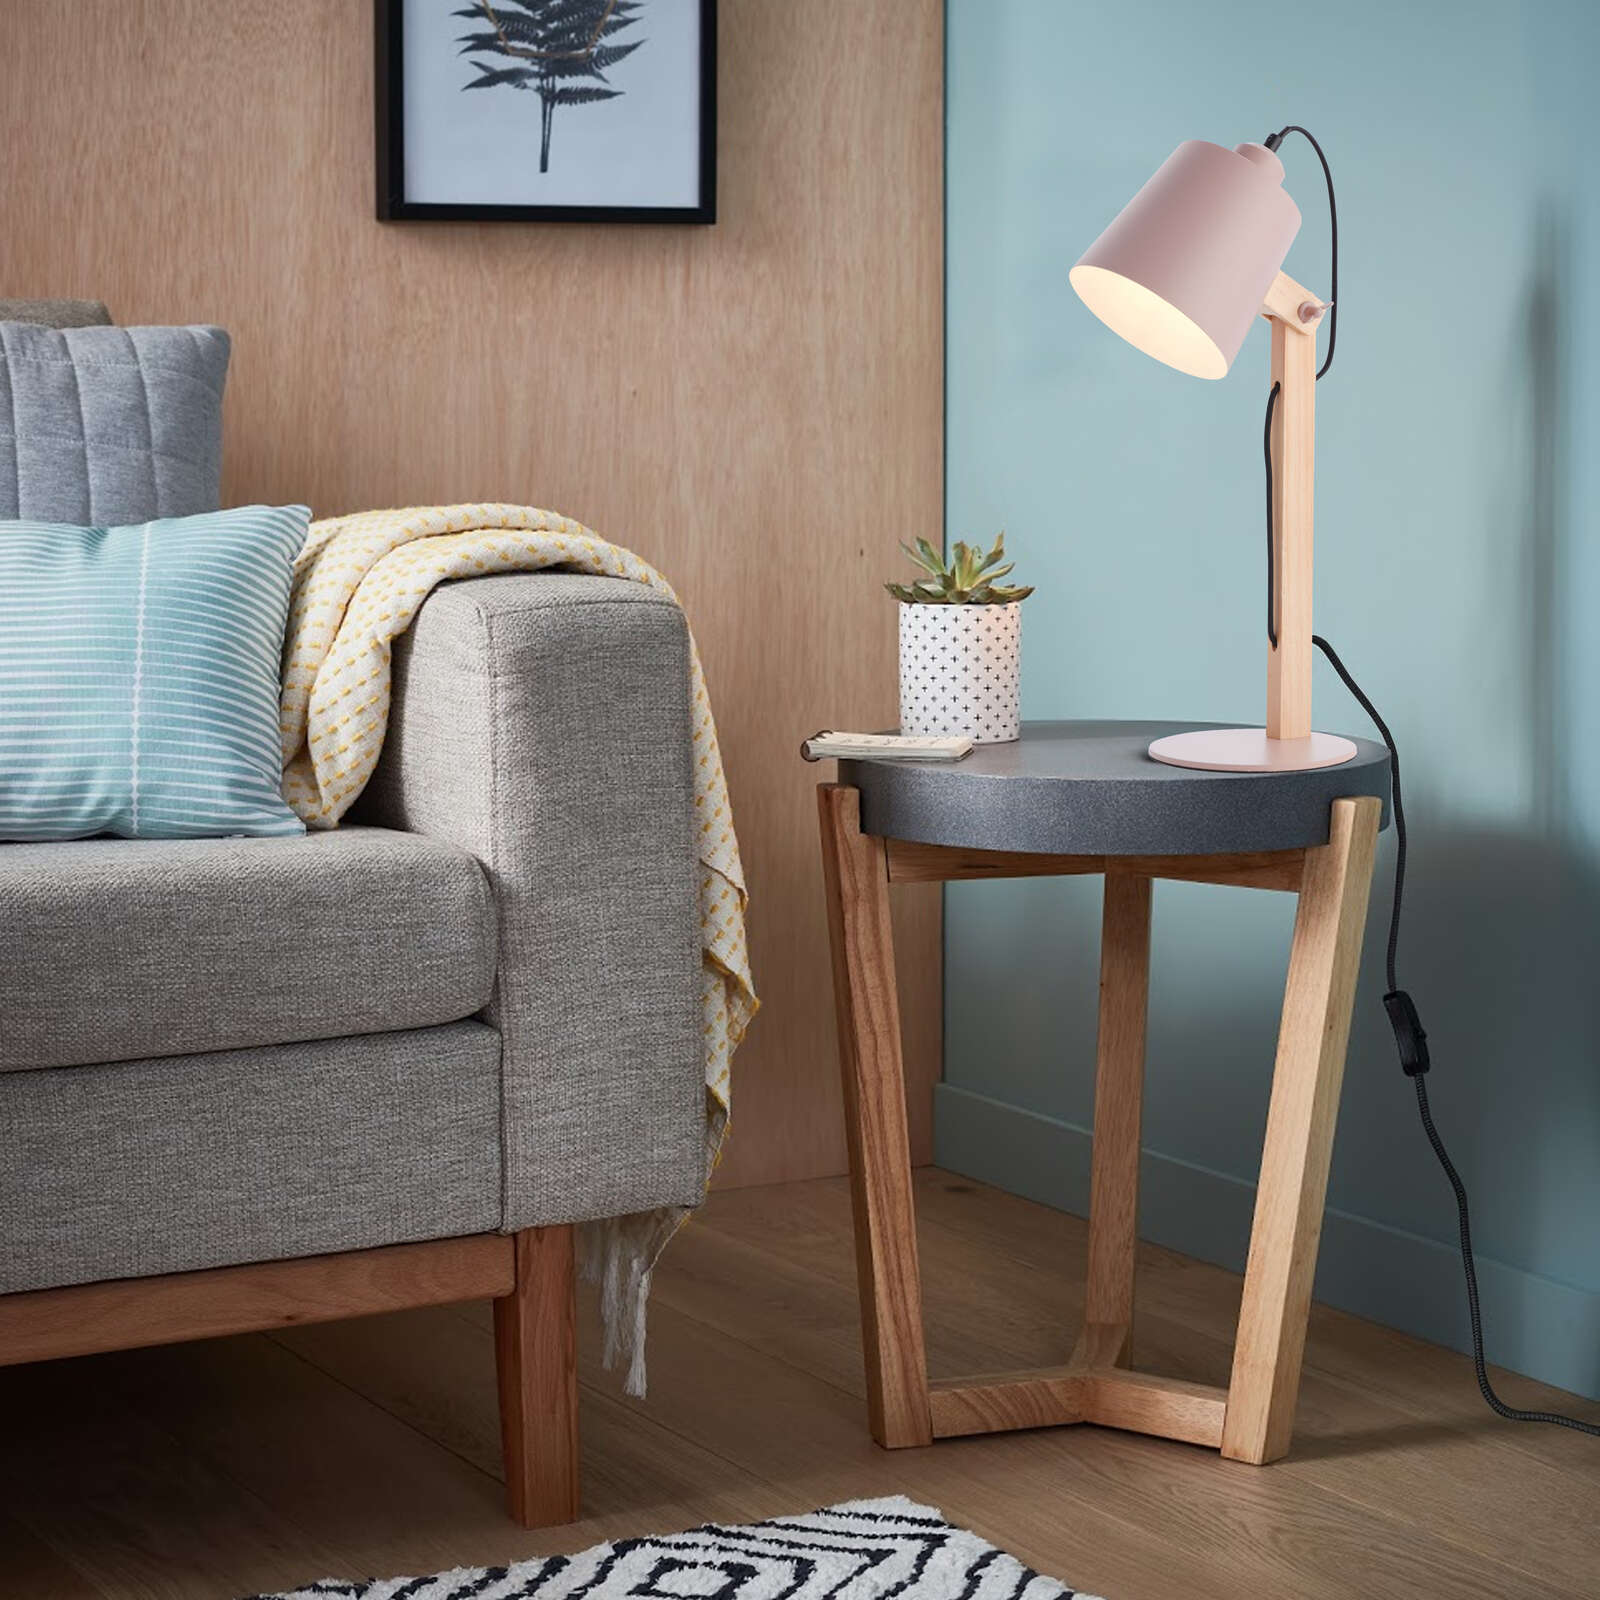             Wooden table lamp - Paul 2 - Pink
        